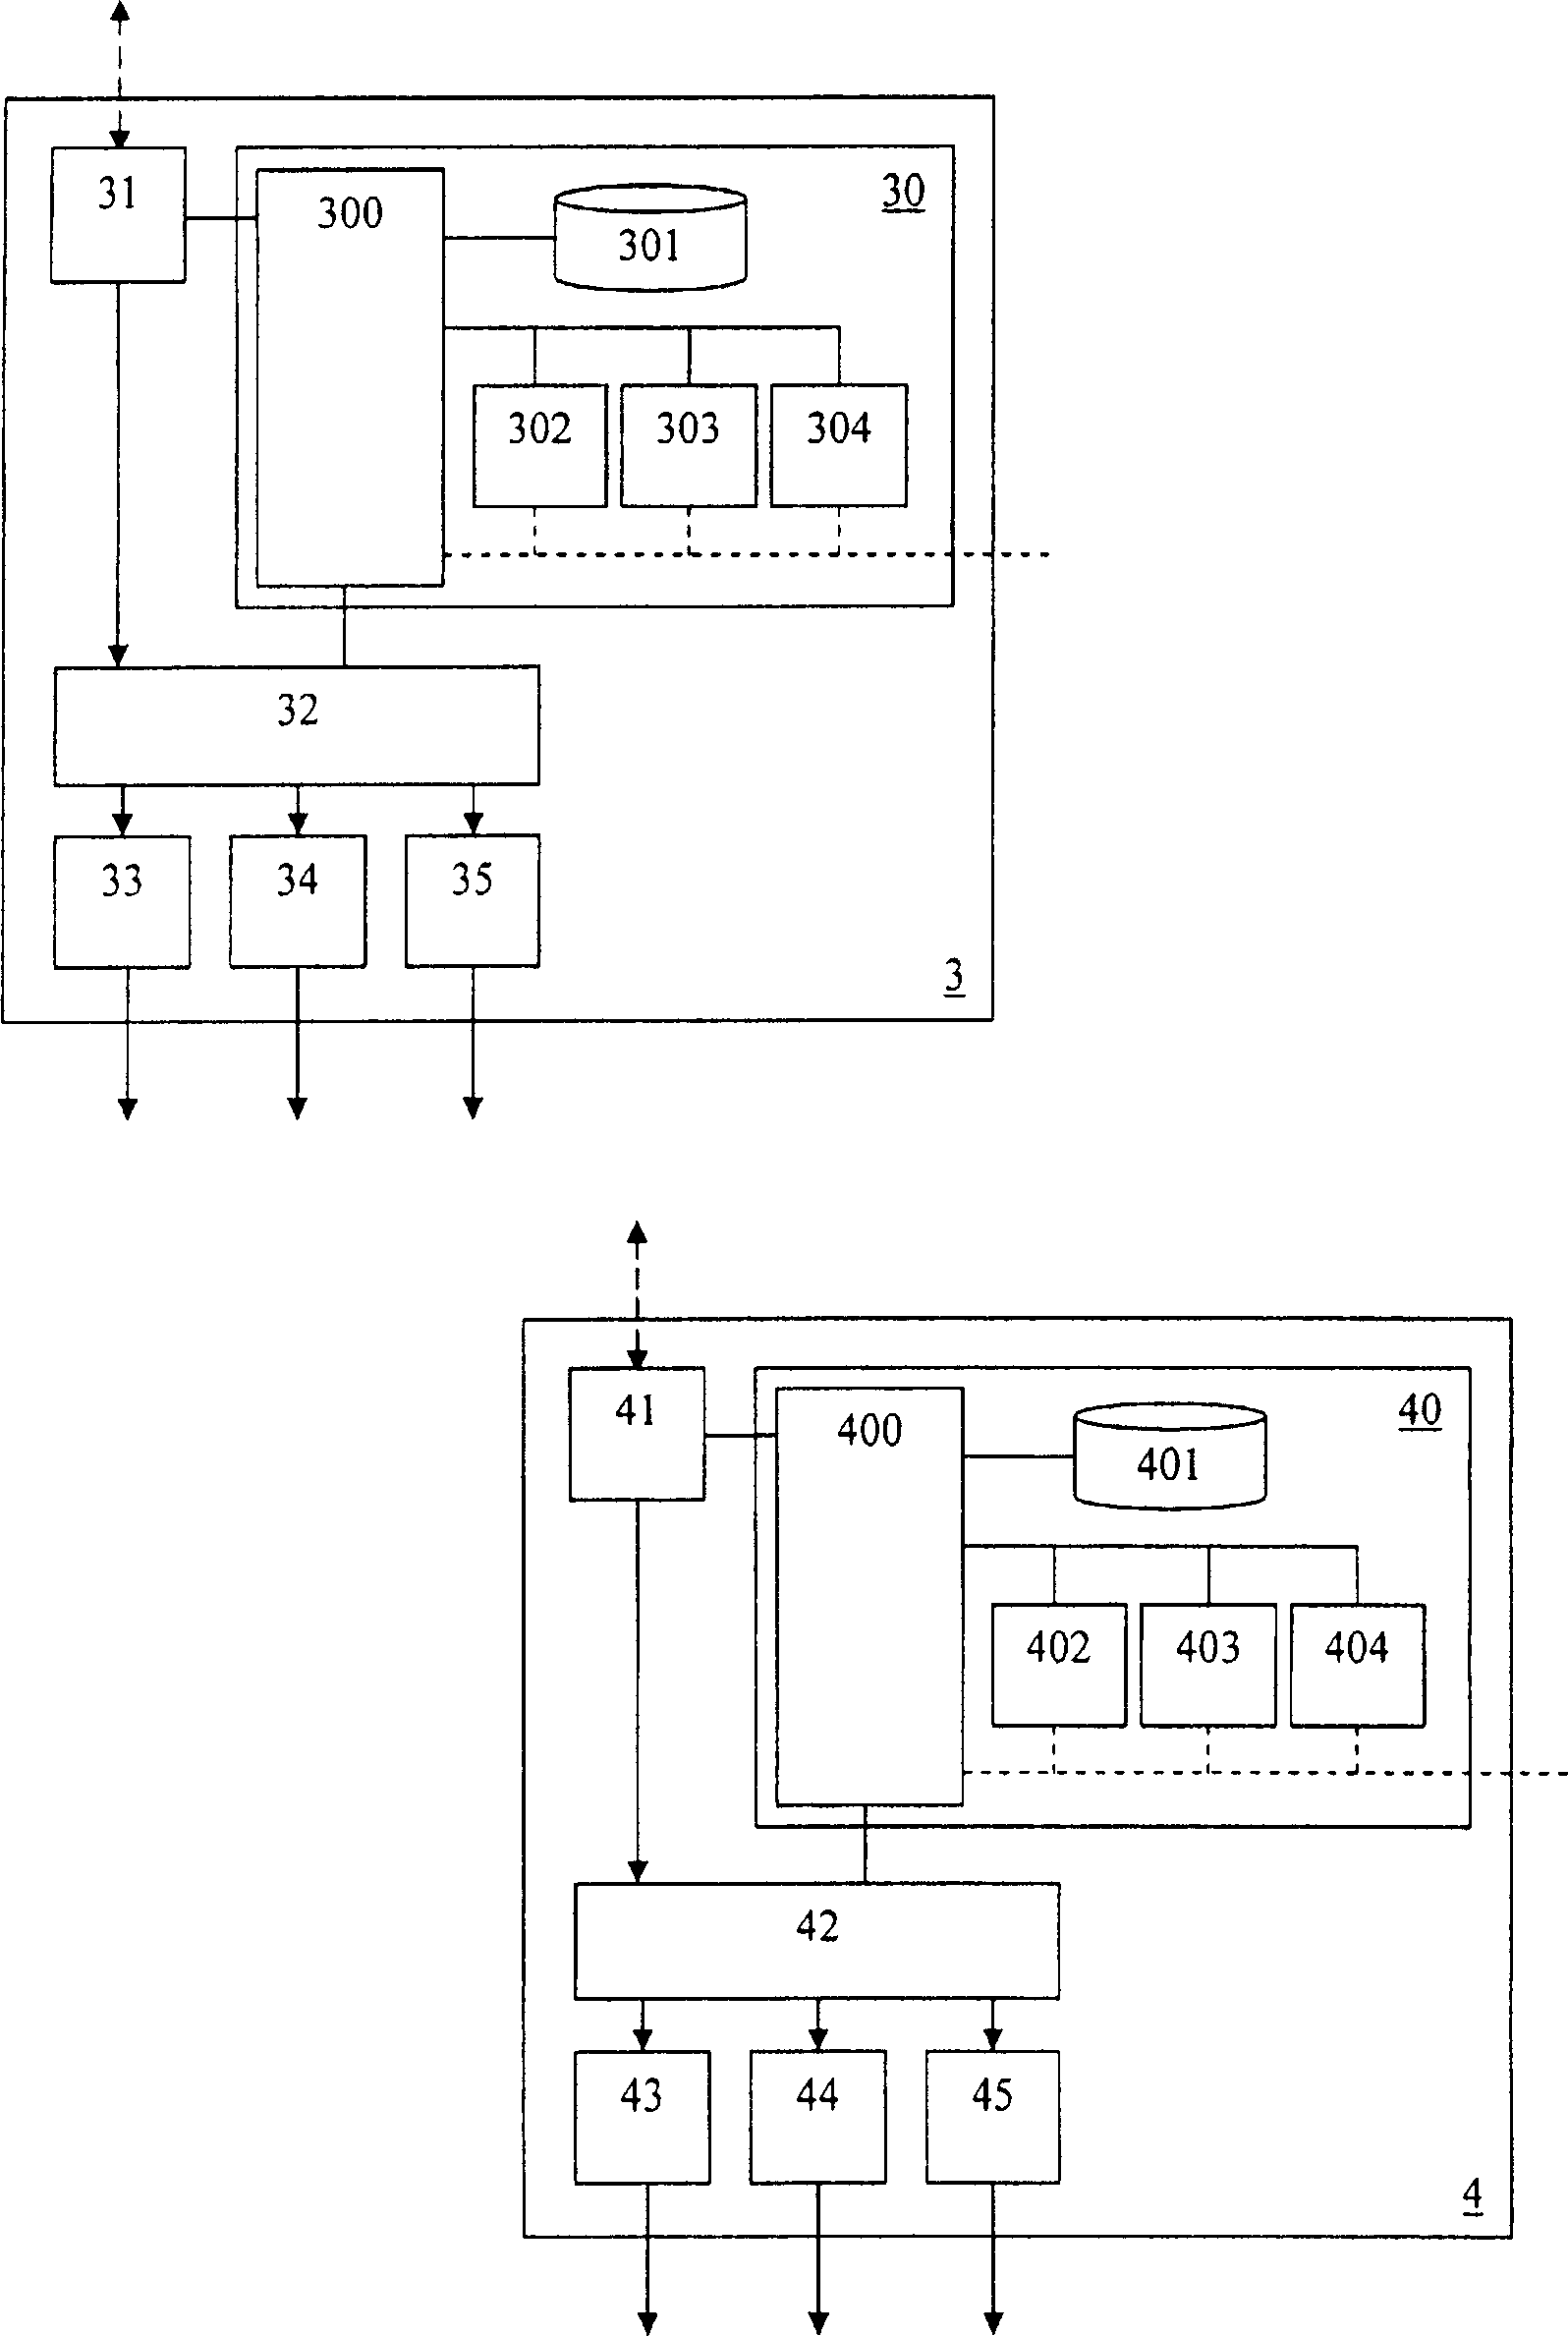 System comprising execution nodes for executing schedules